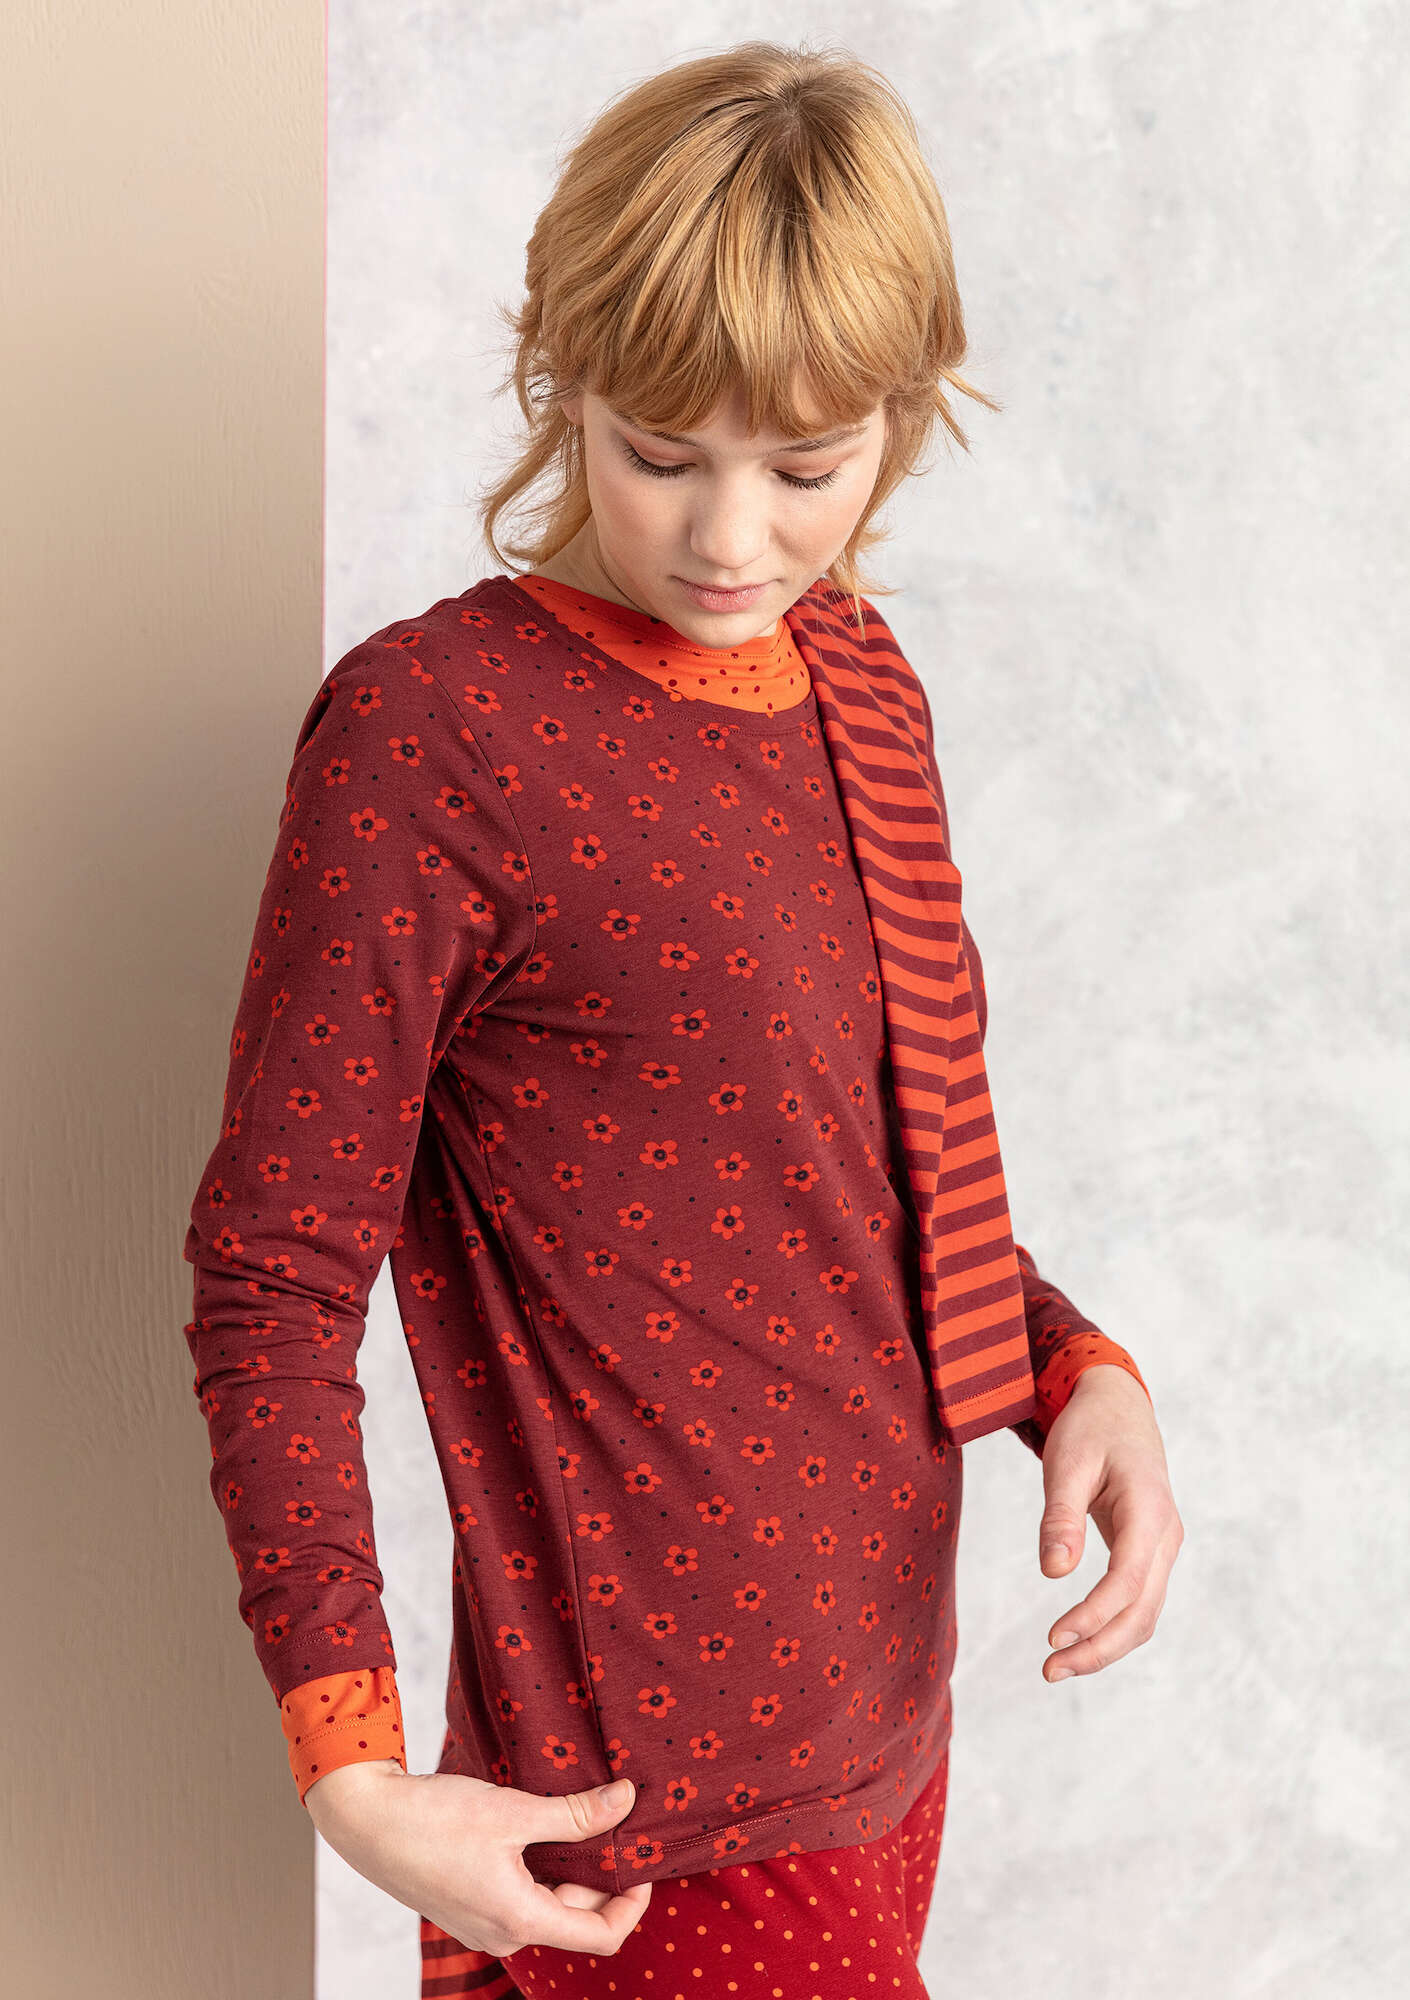 Pytte jersey top agate red/patterned